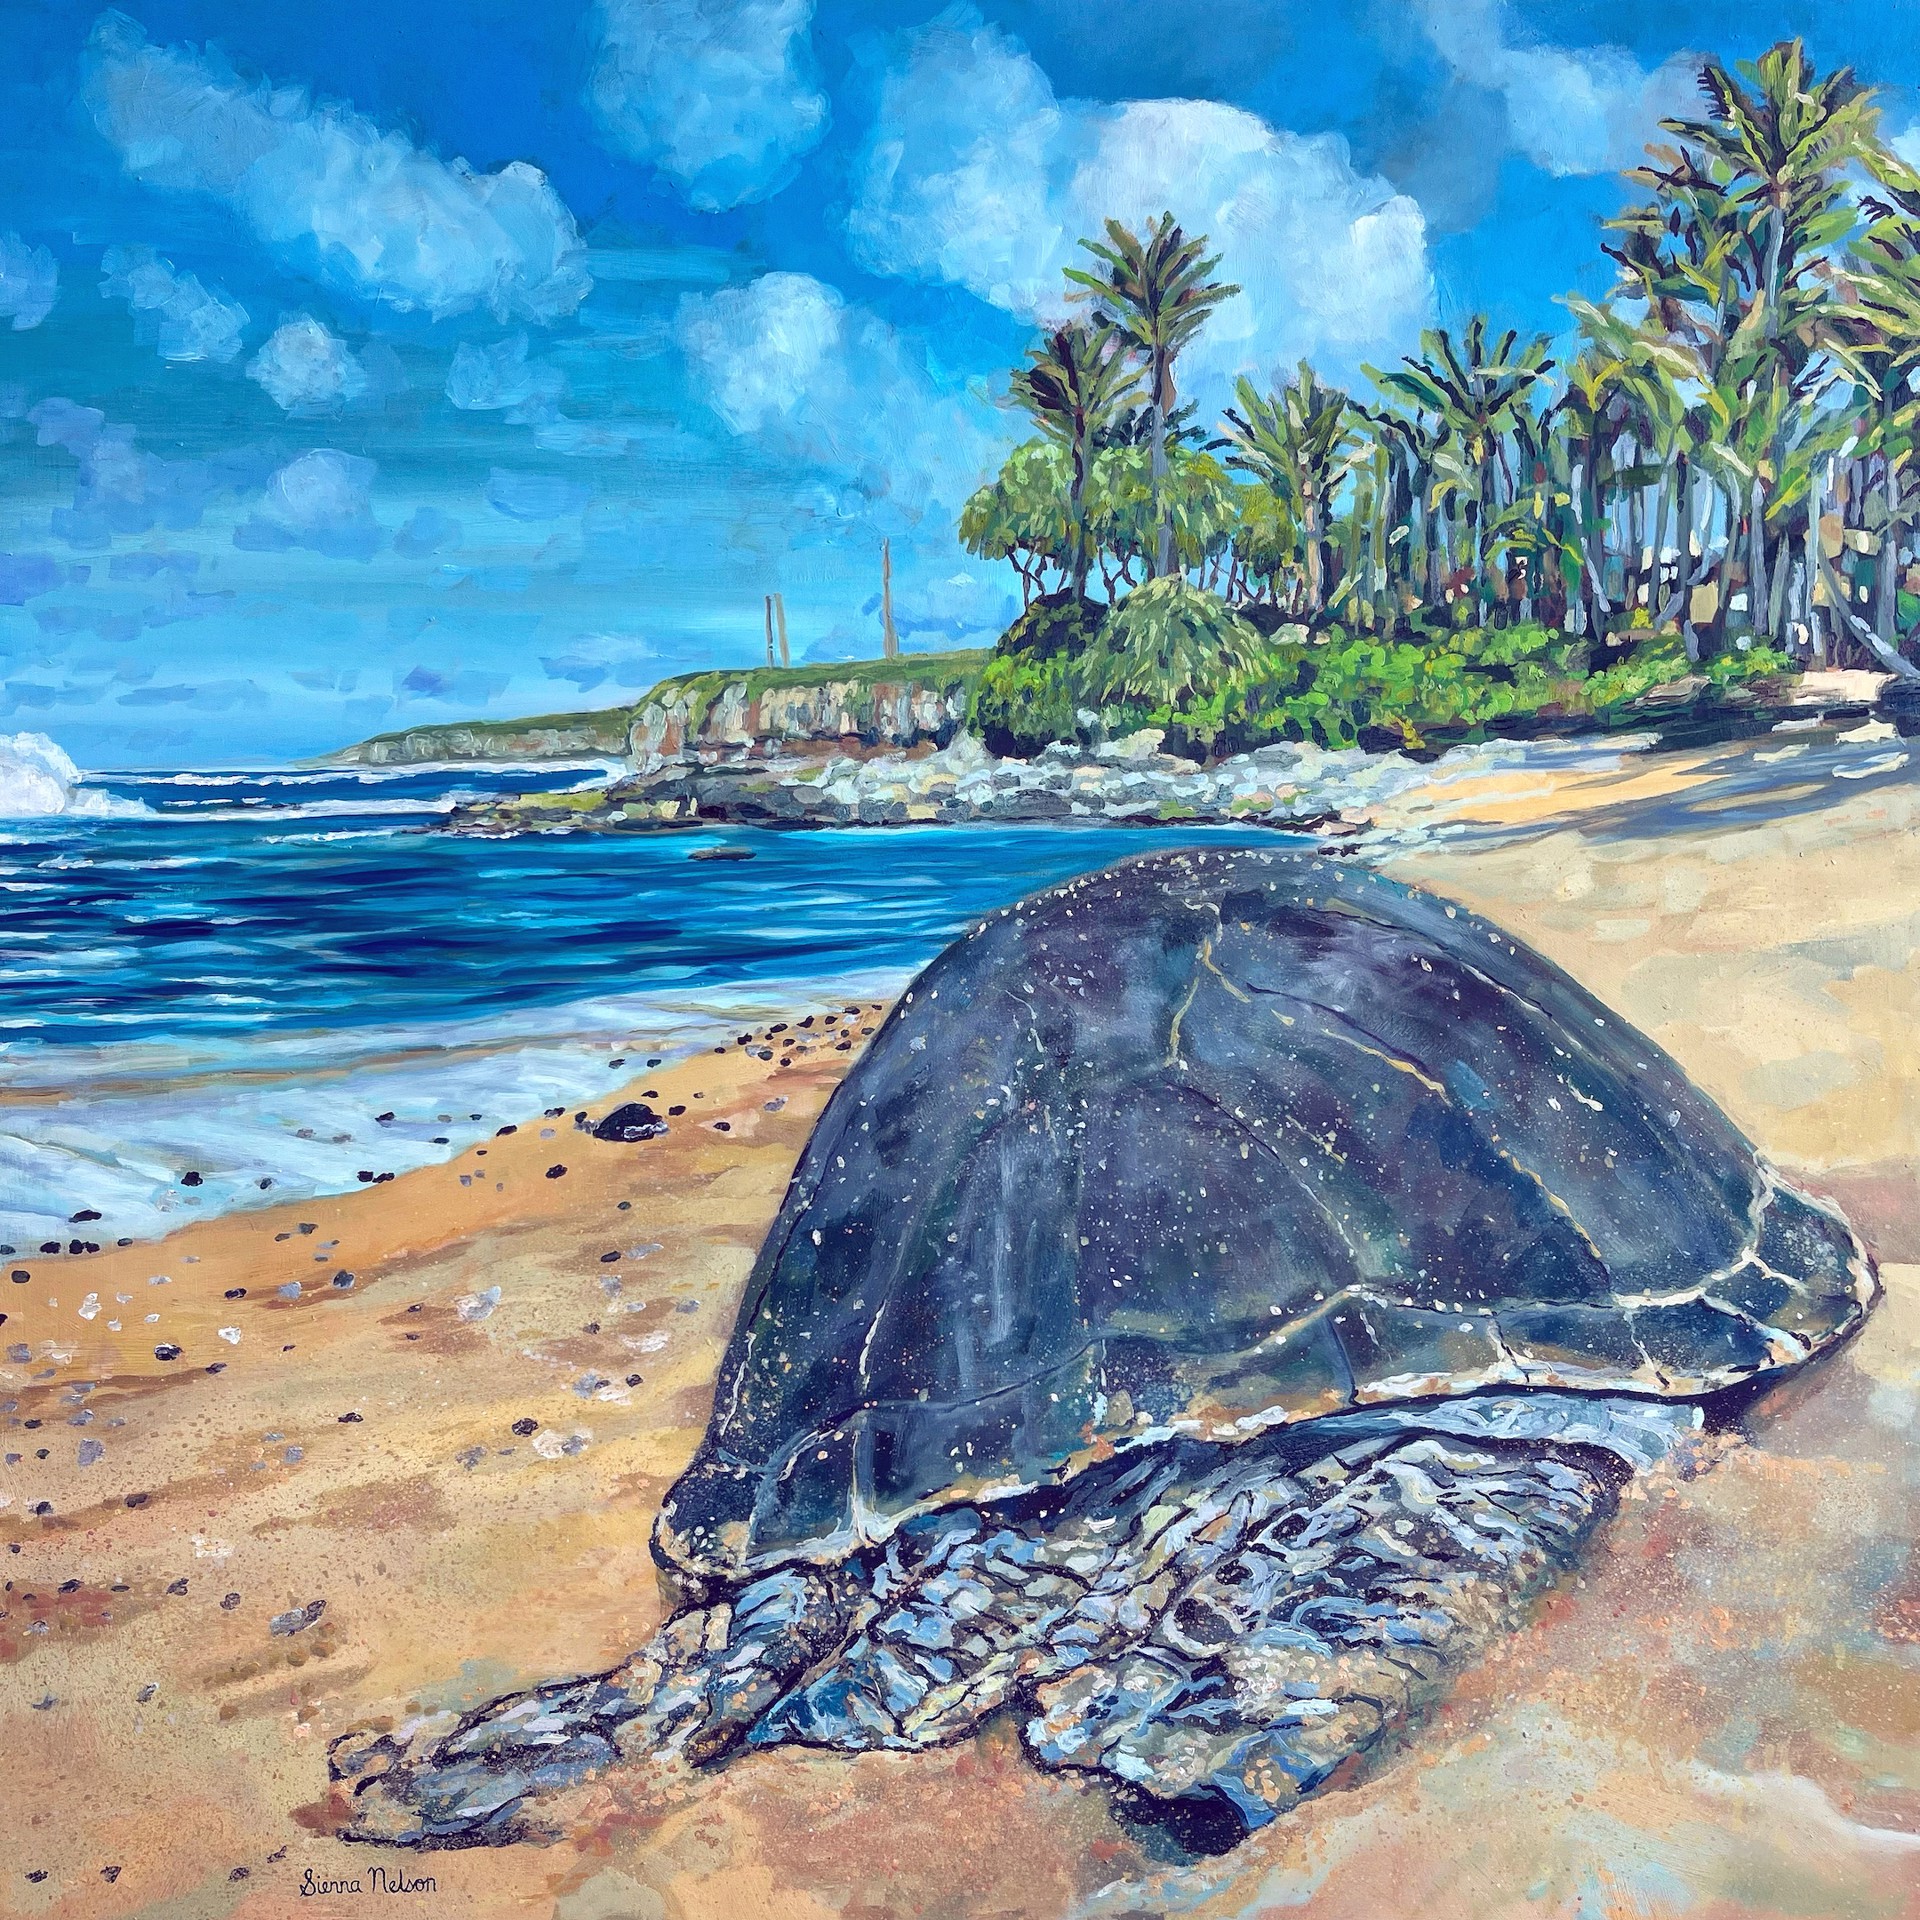 Turtle Tales At Luau Cove by Sienna Nelson